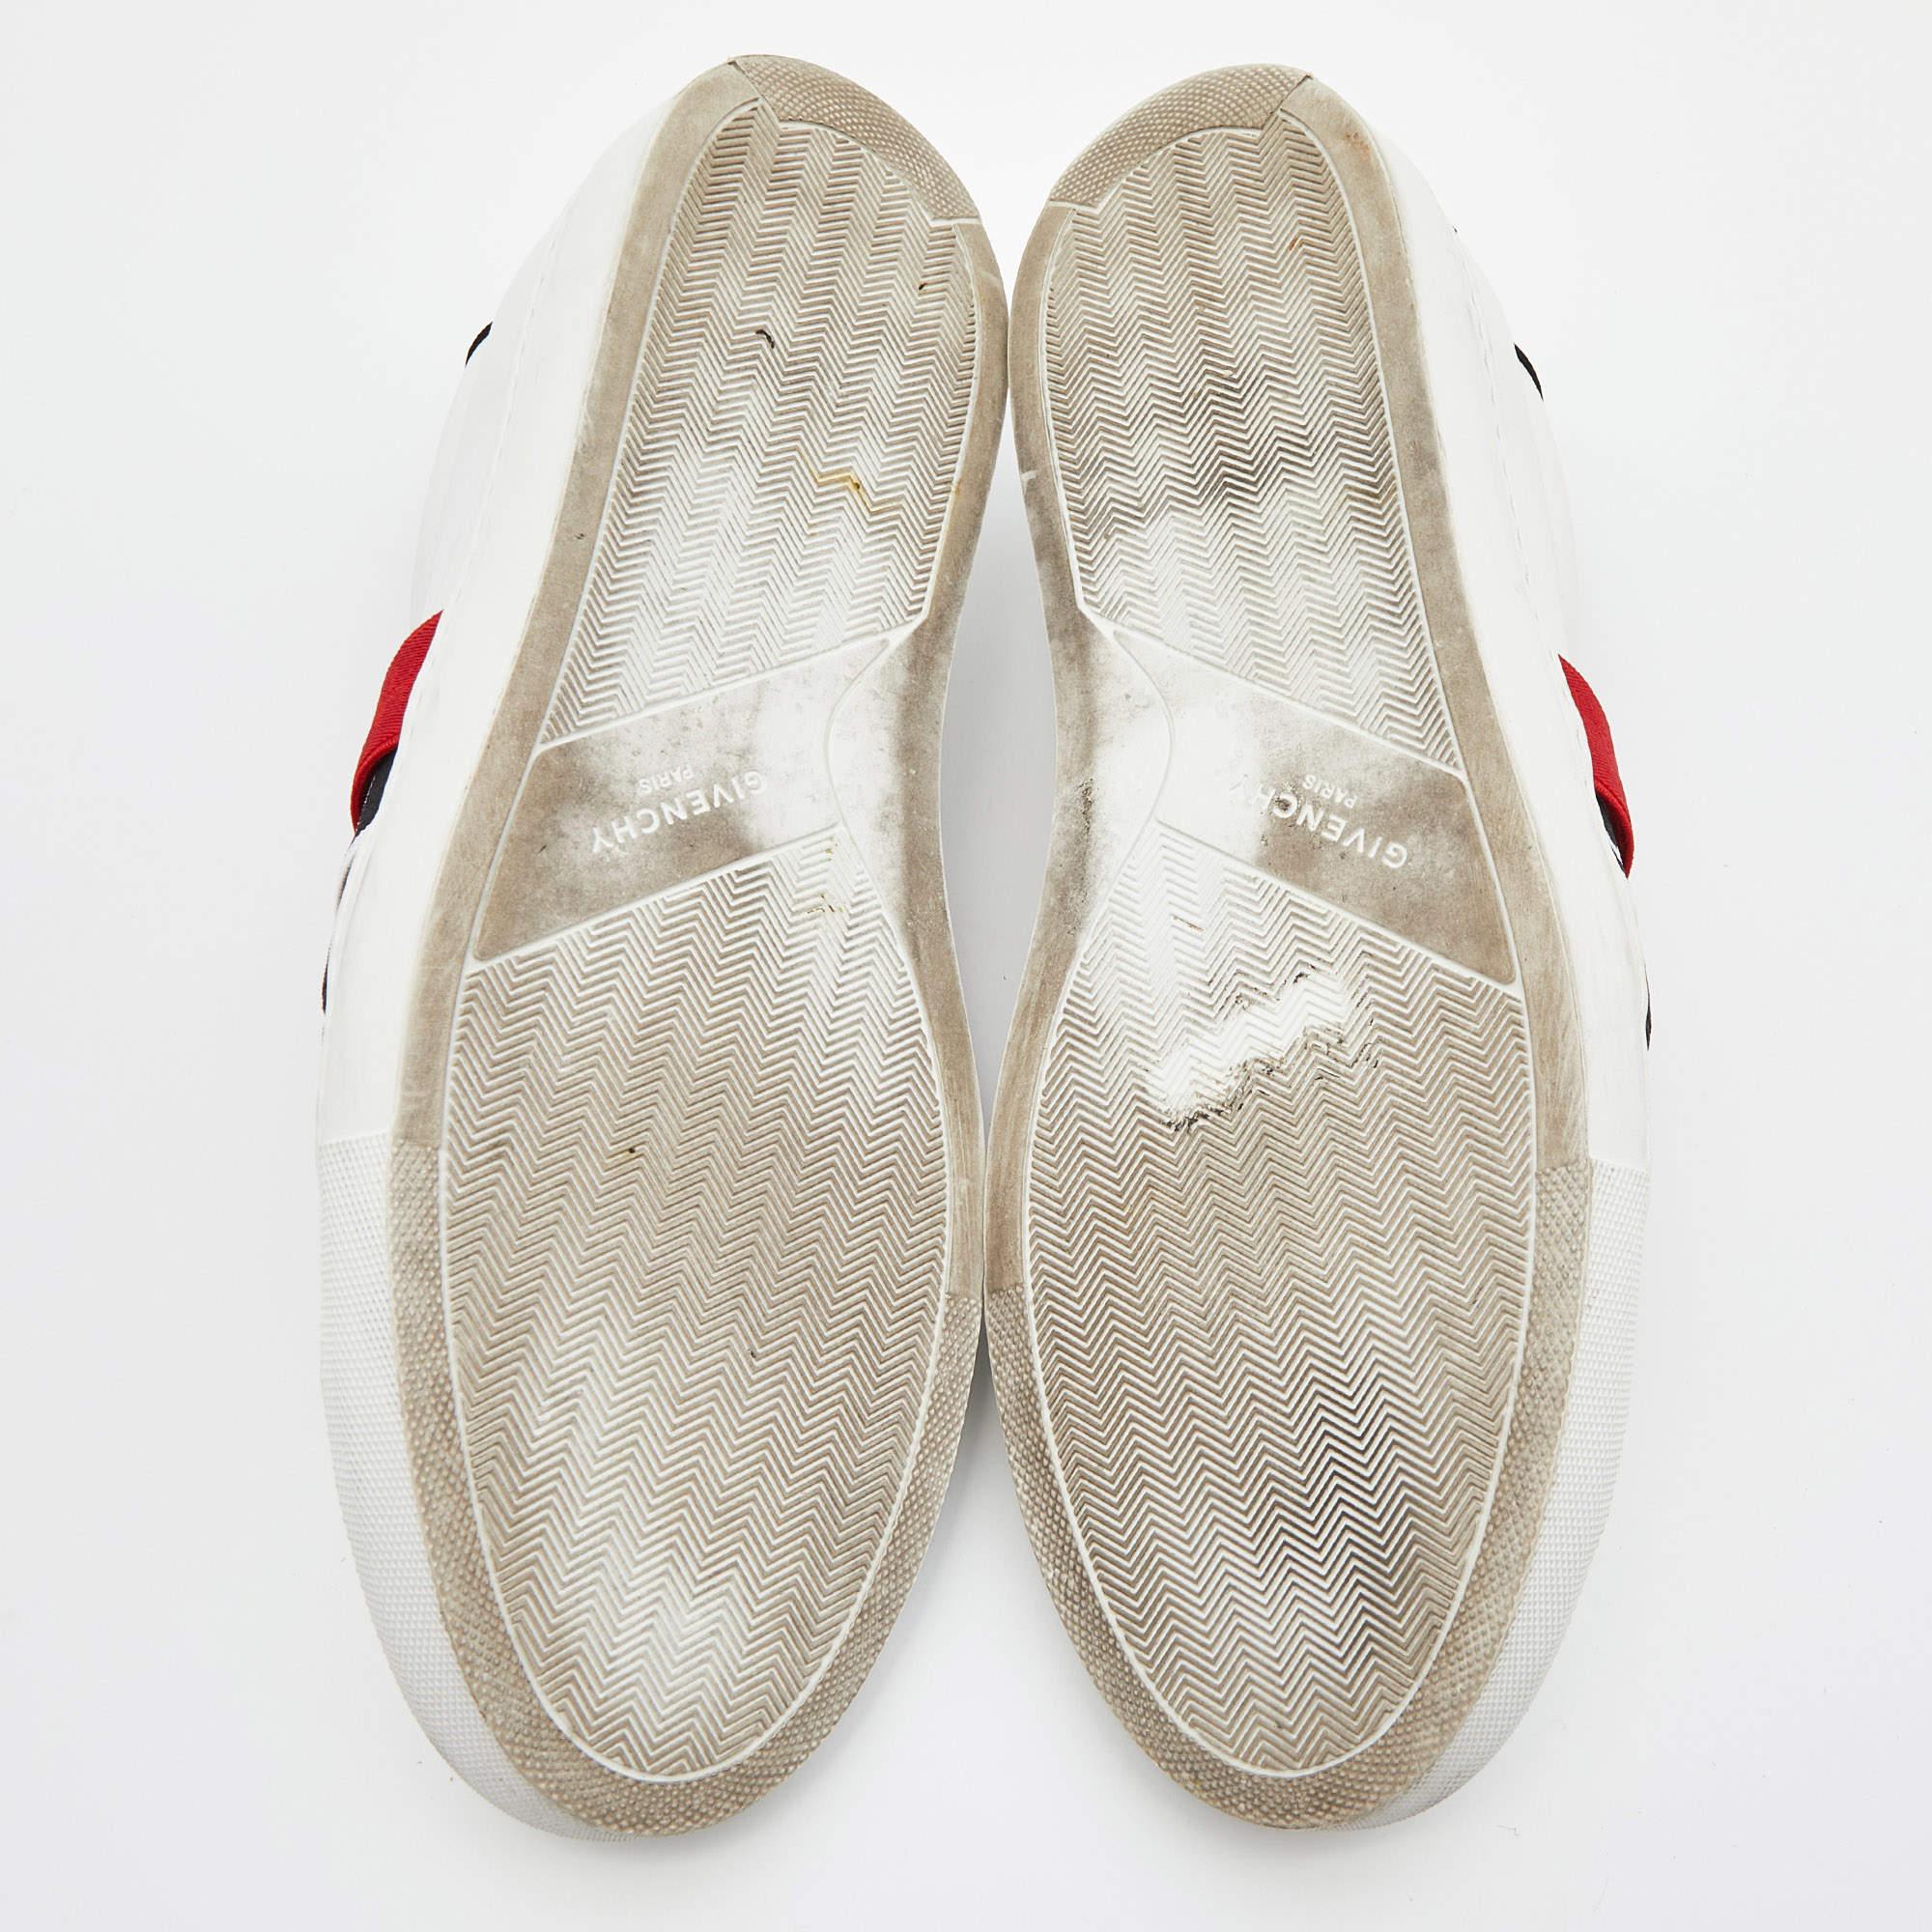 Givenchy White Leather and Stretch Band Urban Street Slip On Sneakers Size 42 2